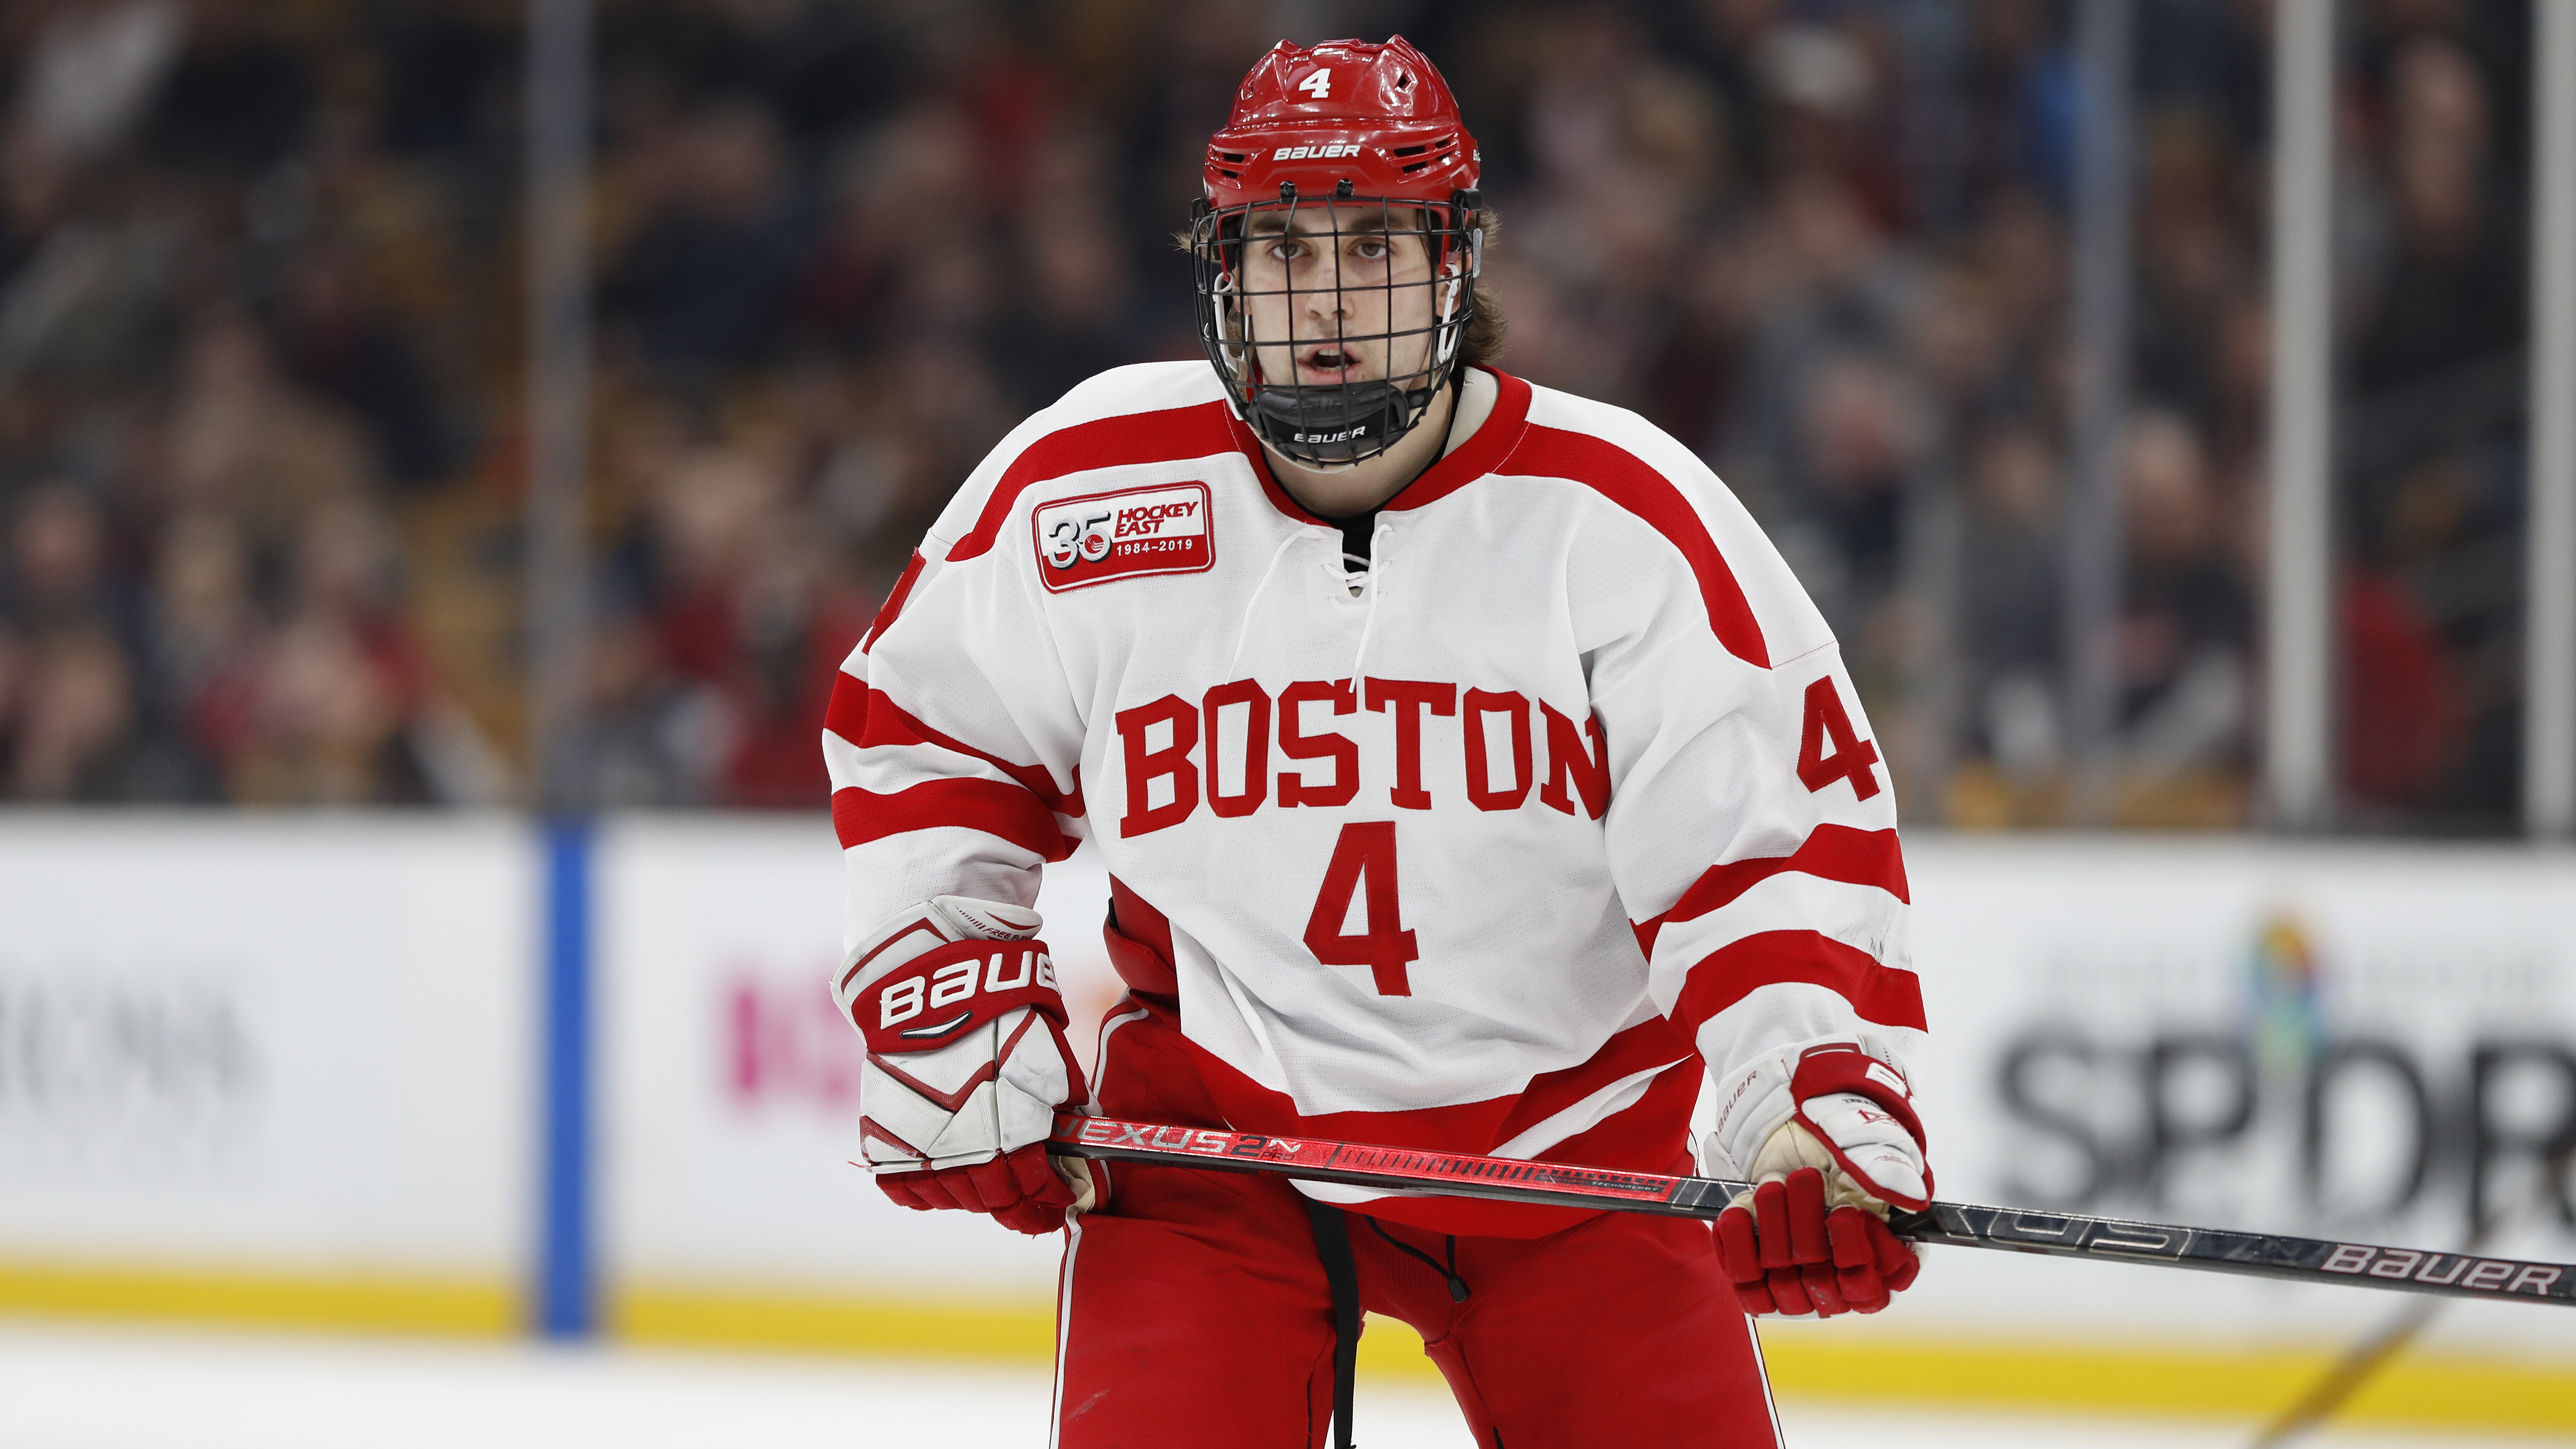 Boston University men, off the ice as a team for more than a month, open  season Friday - The Boston Globe